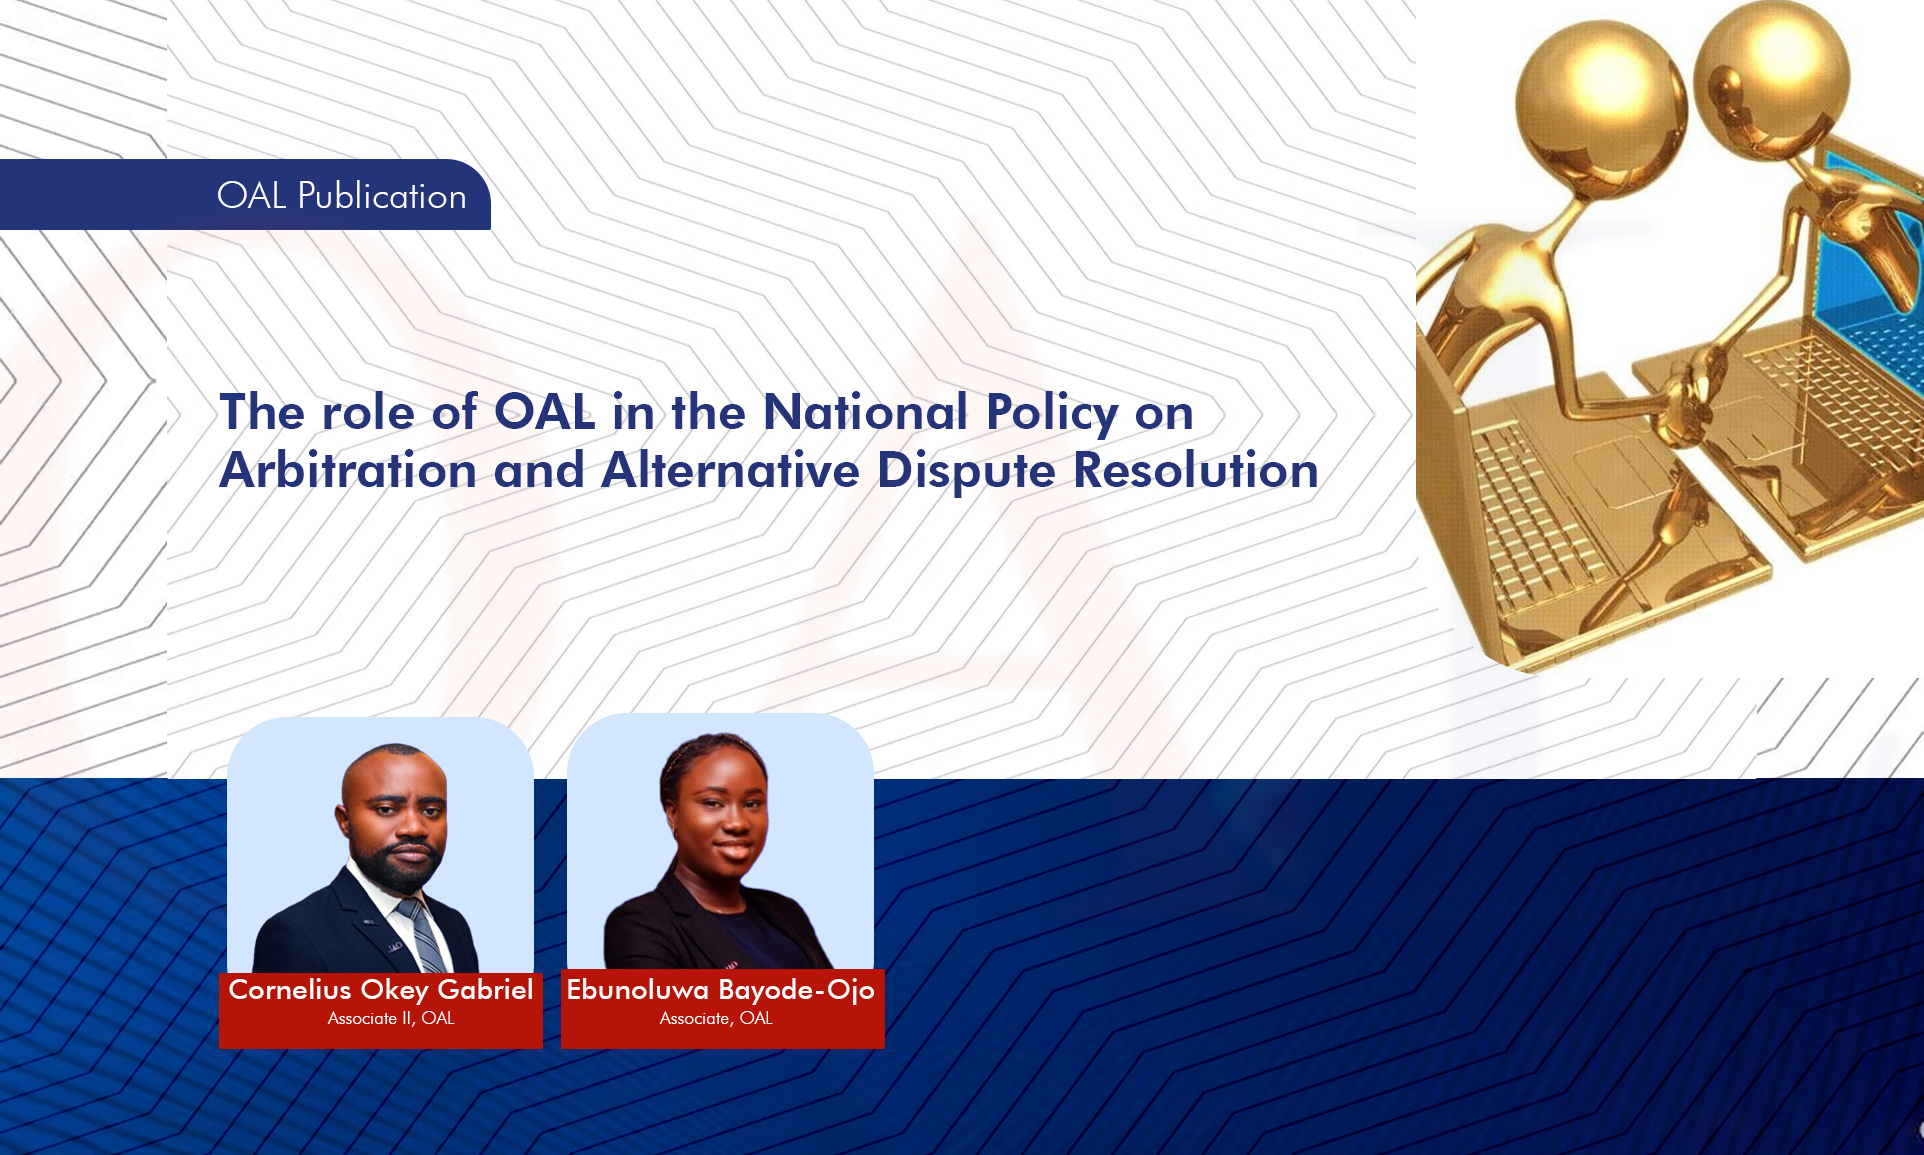 The role of OAL in the National Policy on Arbitration and Alternative Dispute Resolution